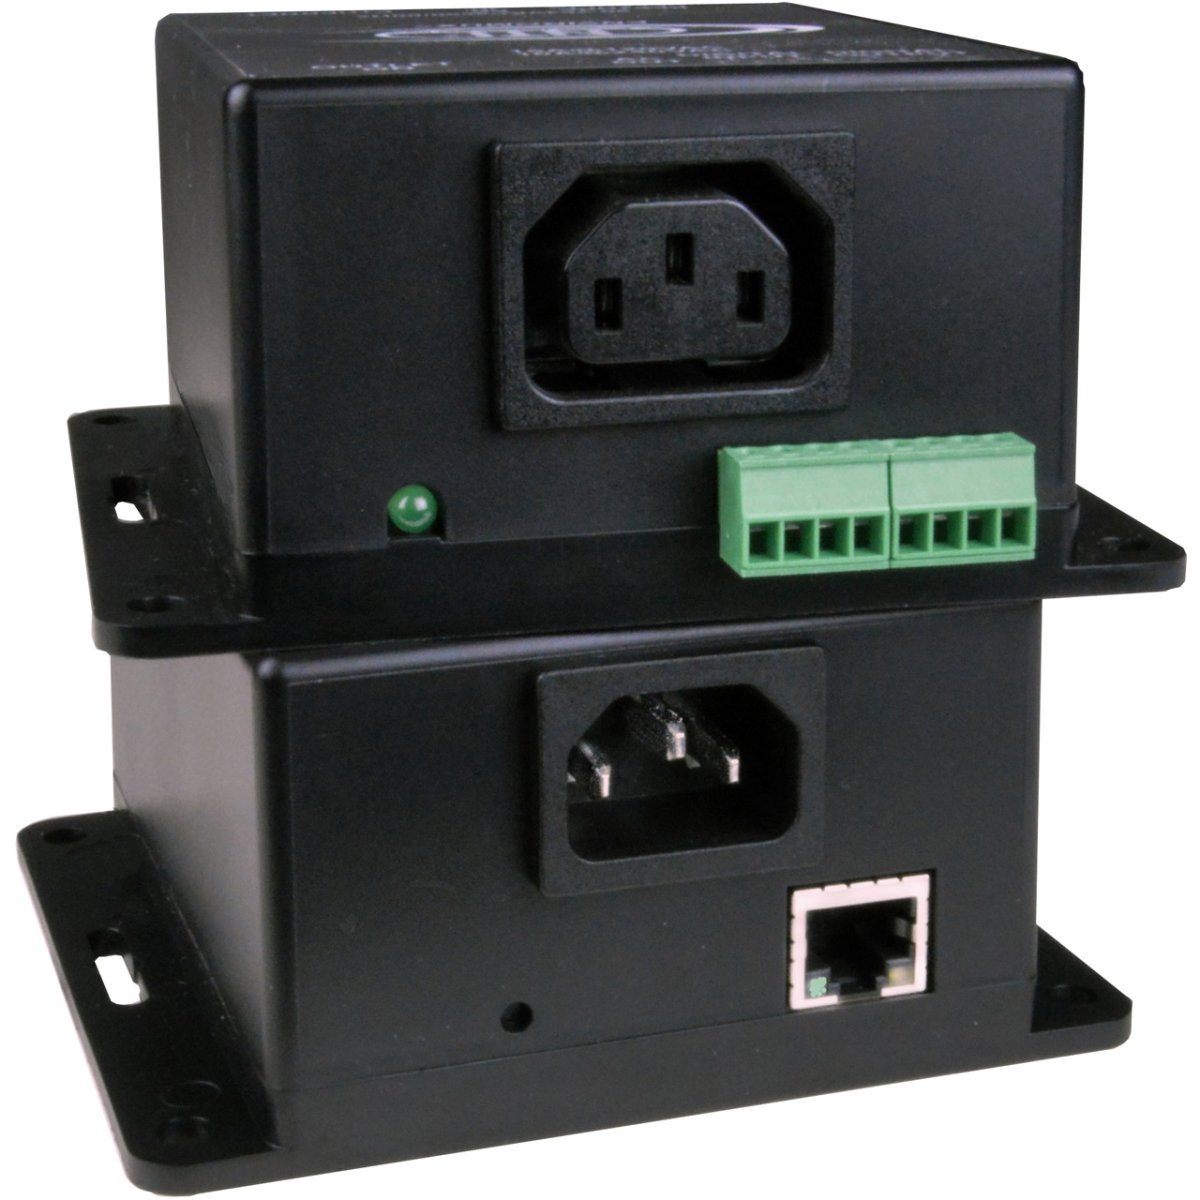 Picture of Network Technologies NETT-PWRRMRBTC13 ENVIROMUX Low-Cost Remote Power Reboot Switch with IEC320 C13 Outlet & 2 Digital Terminal In-Out